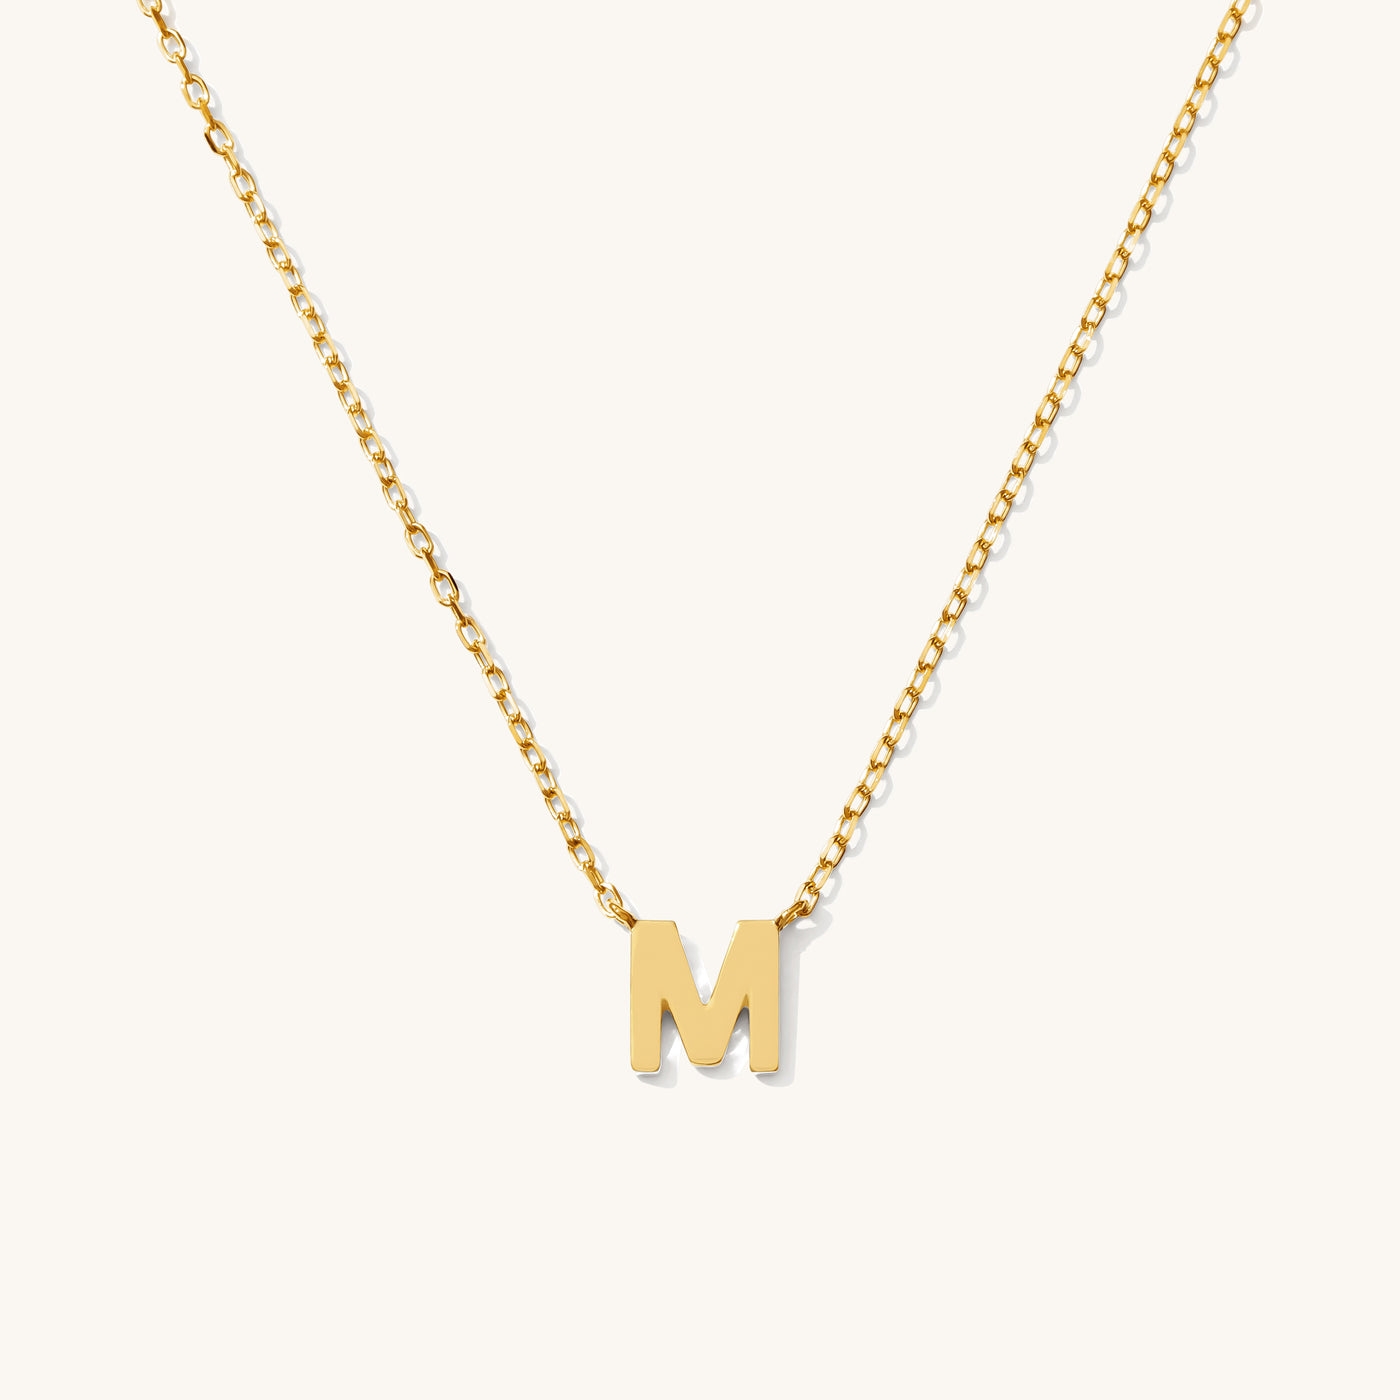 M Tiny Initial Necklace - 14k Solid Gold